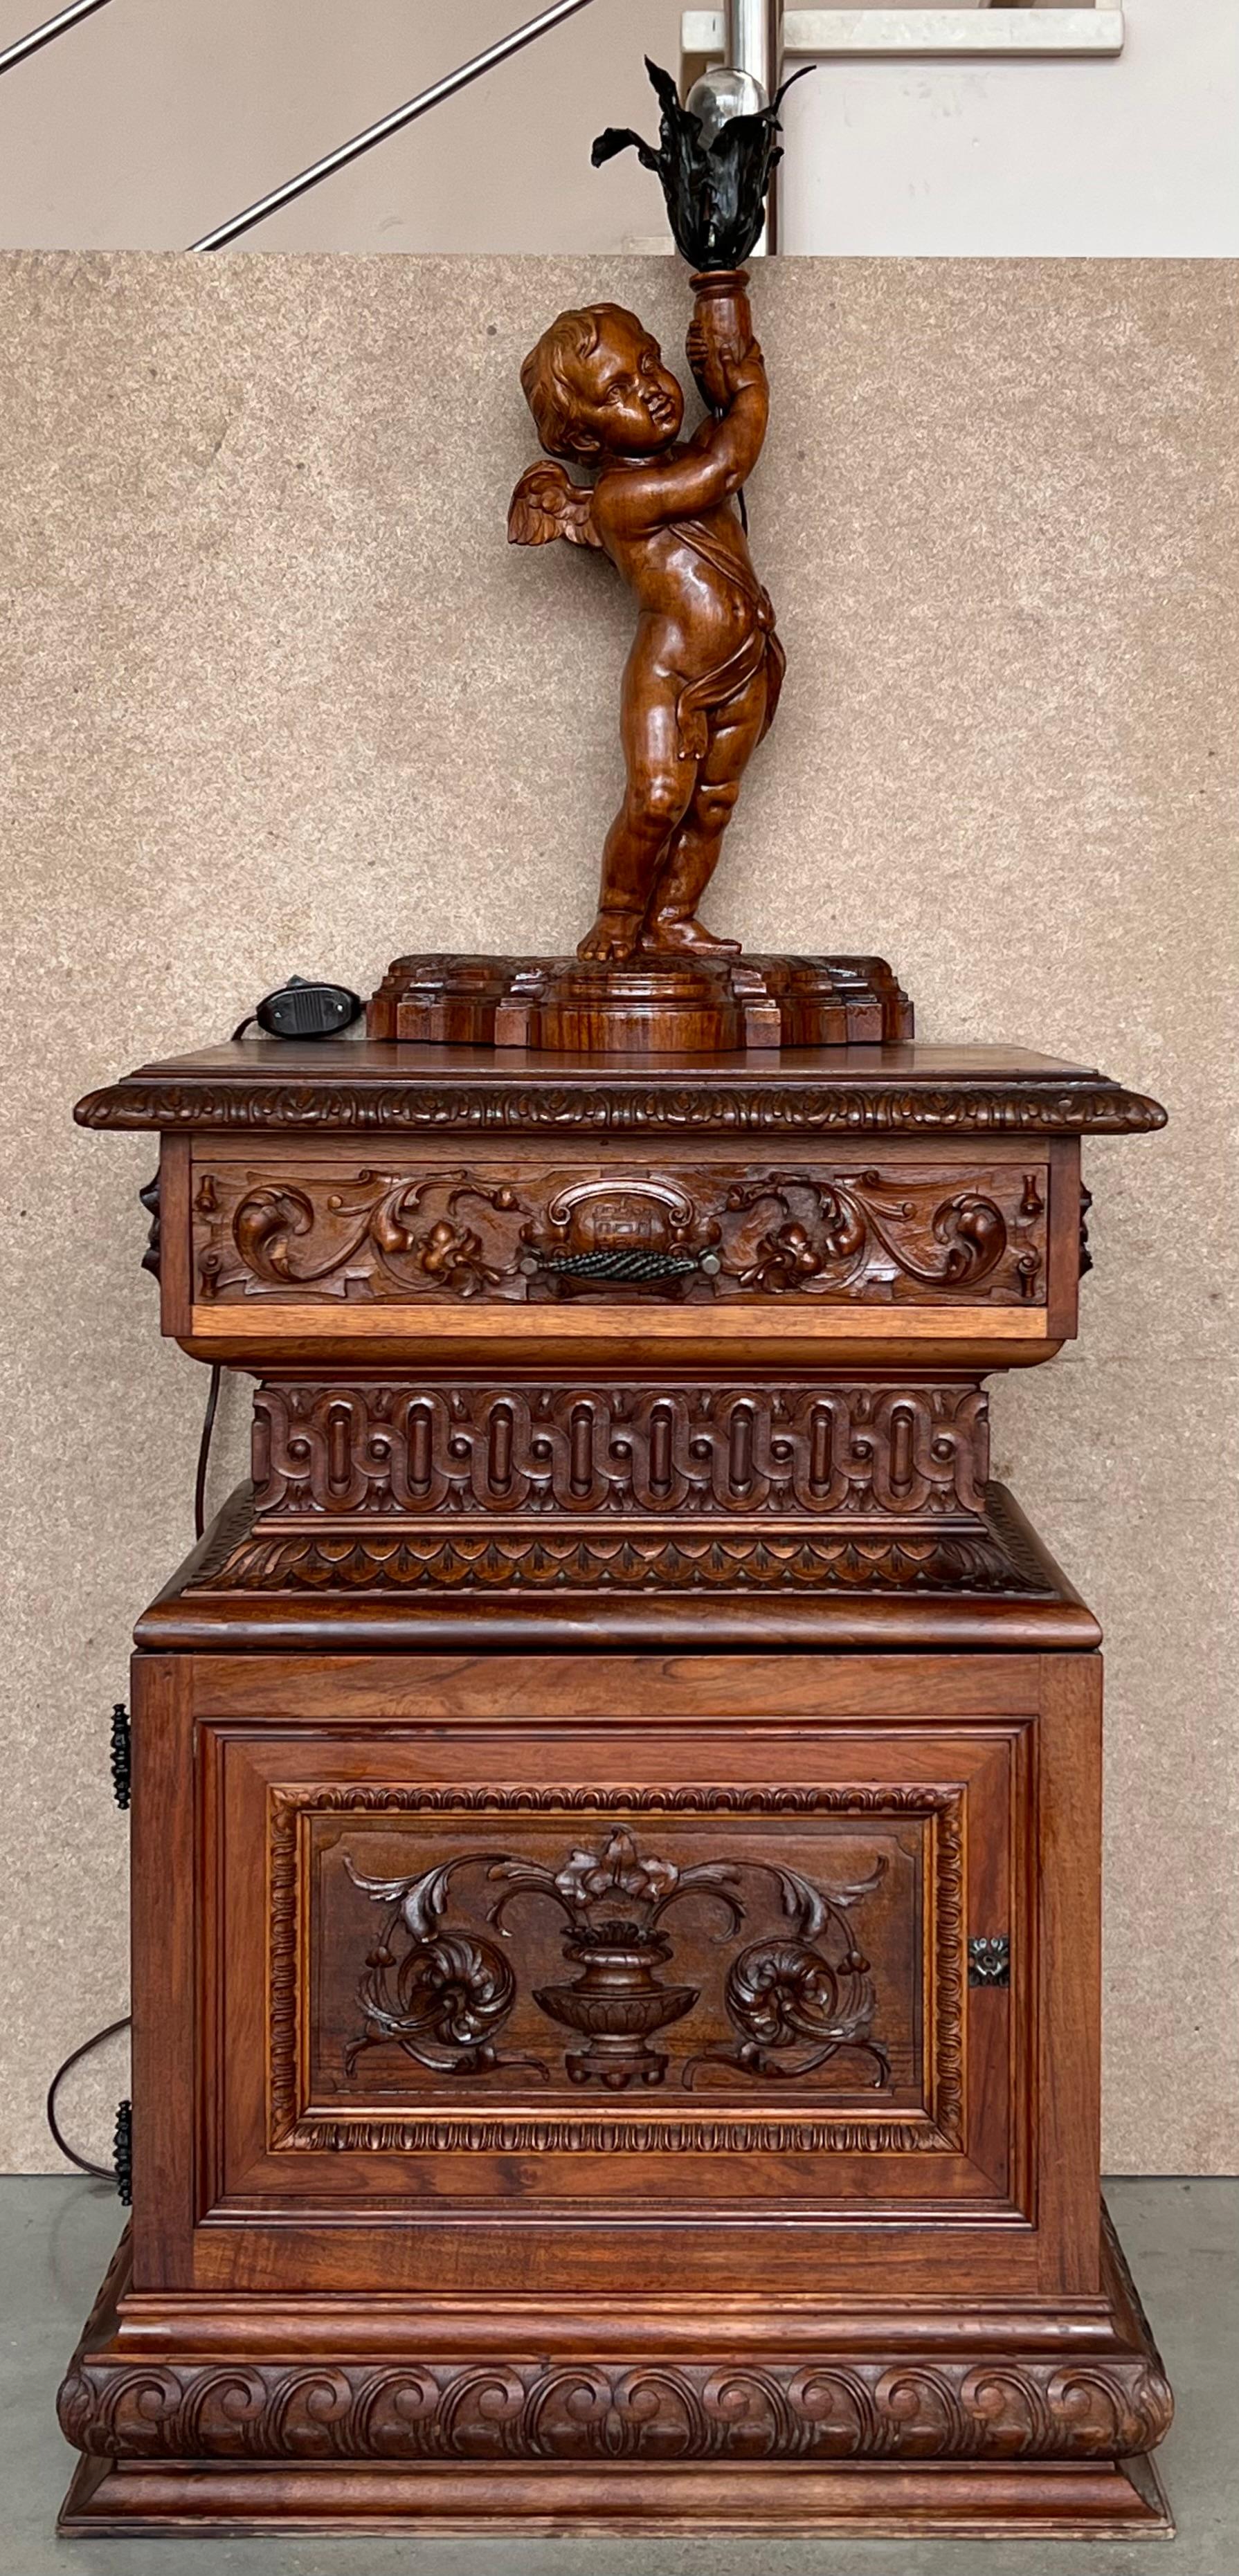 Pair of hight carved nightstands with richly carved in front and sides.
Hight drawer with and special hardware and low low door with great compartment.
The tables had a handsome cherub lamps that works.
It's a really beautiful piece of this